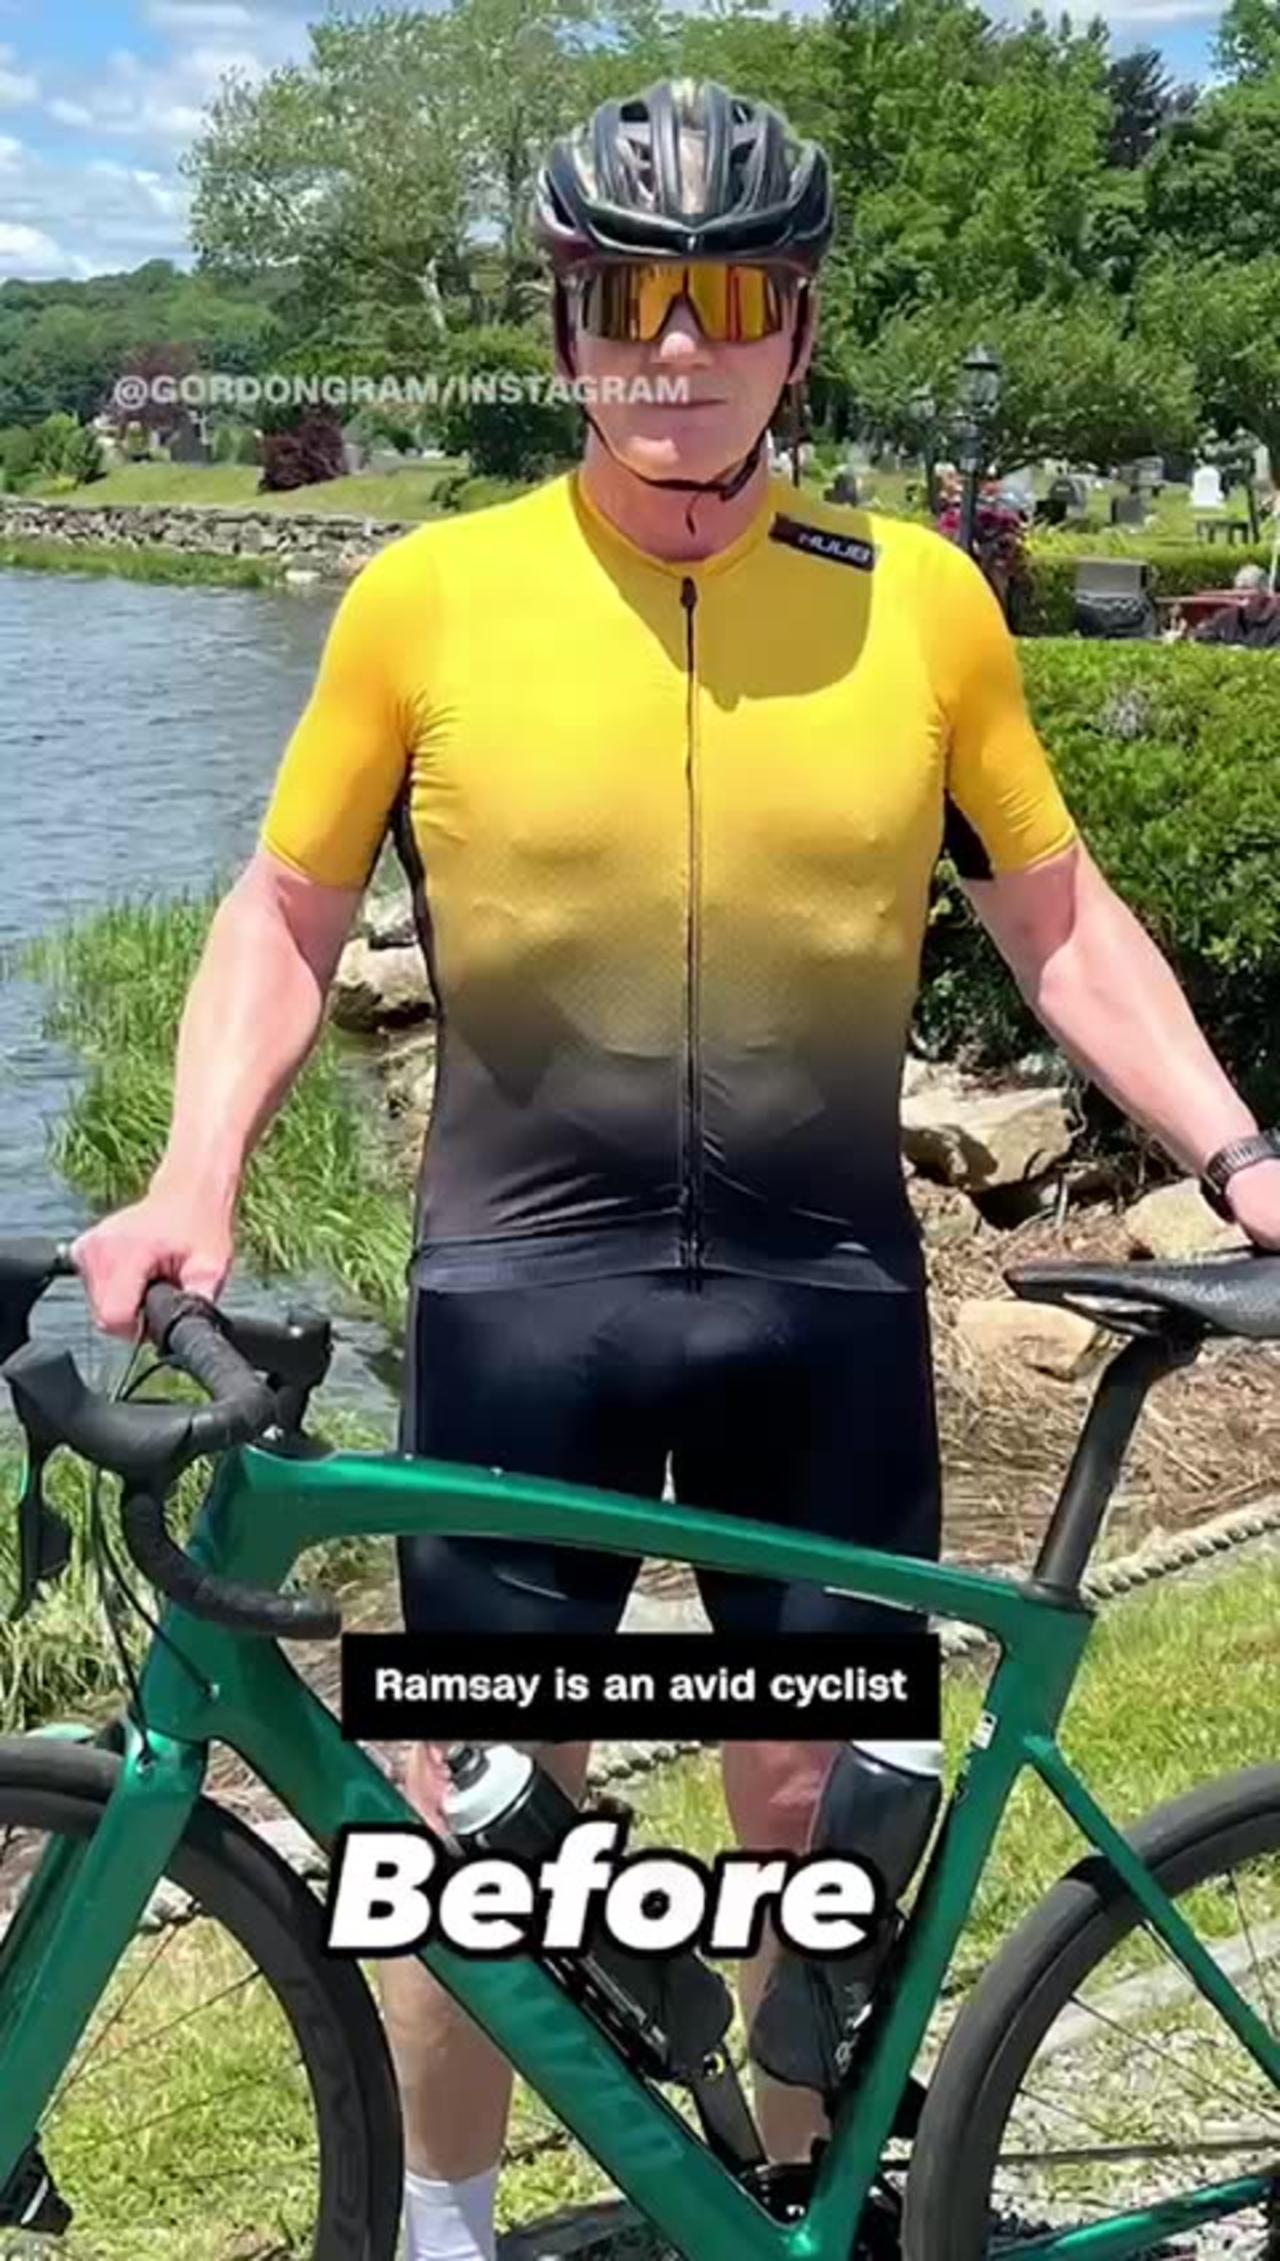 Celebrity chef Gordon Ramsay said that he's lucky to be alive after a recent cycling